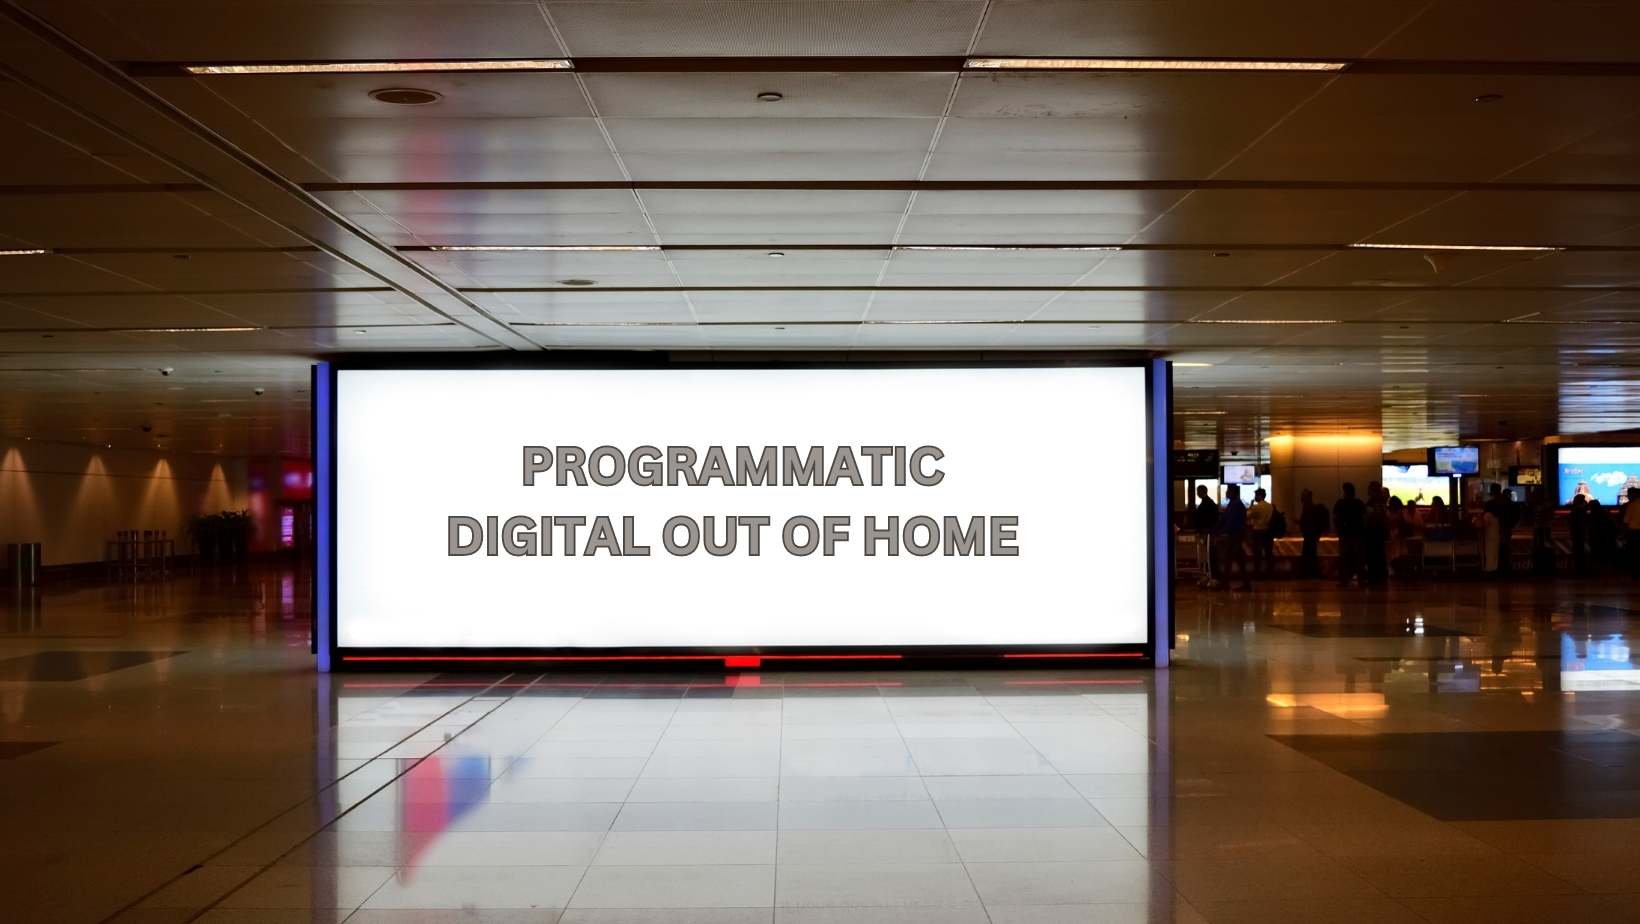 WHAT IS PROGRAMMATIC DIGITAL OUT OF HOME